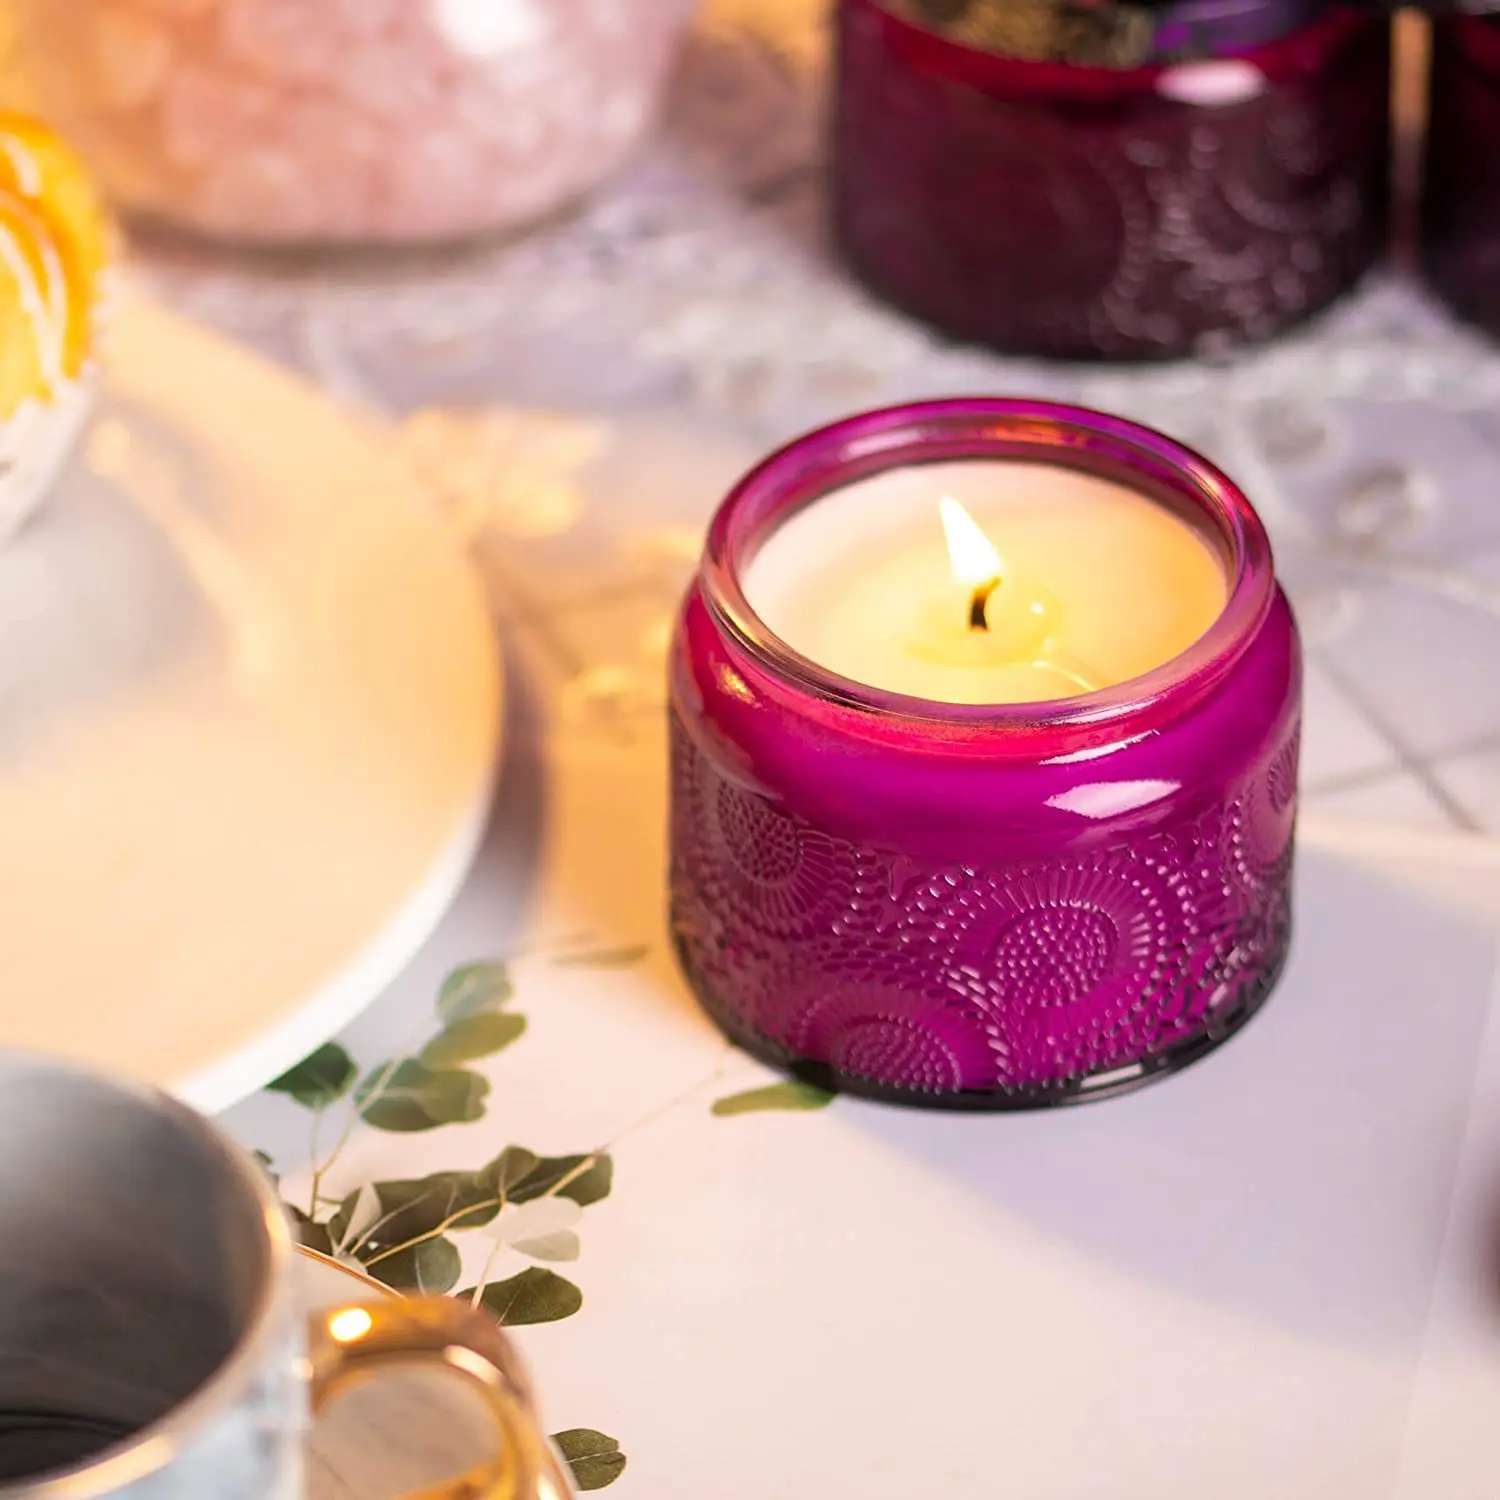 JD-C-1613 Hot 120ml embossed round pattern candle jar Colored scented candle holder embossed glass candle cup with lid purple